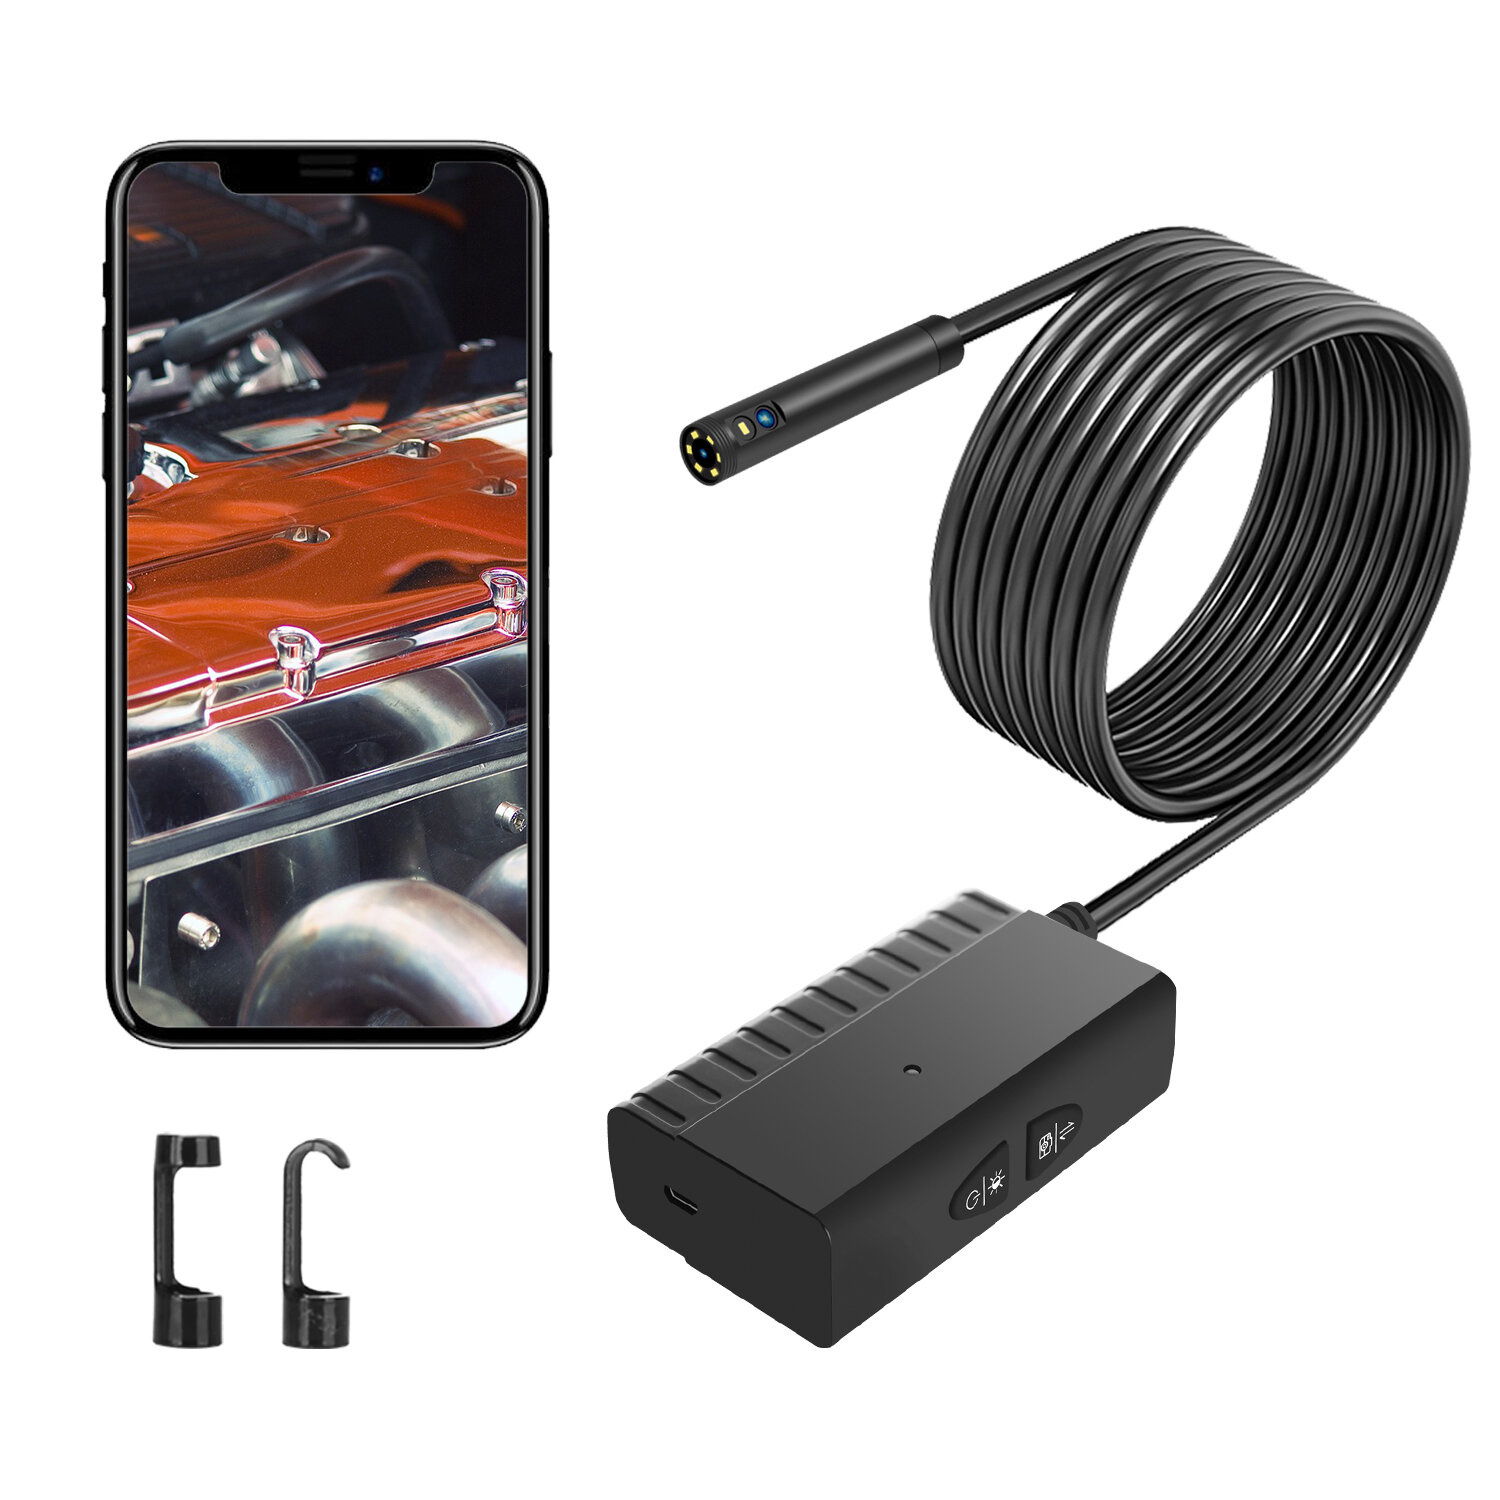 

NK-WS3 8mm 6 LED Double Lens Waterproof WIFI Borescope HD Inspection Camera for IOS Android Phones Hard Wire